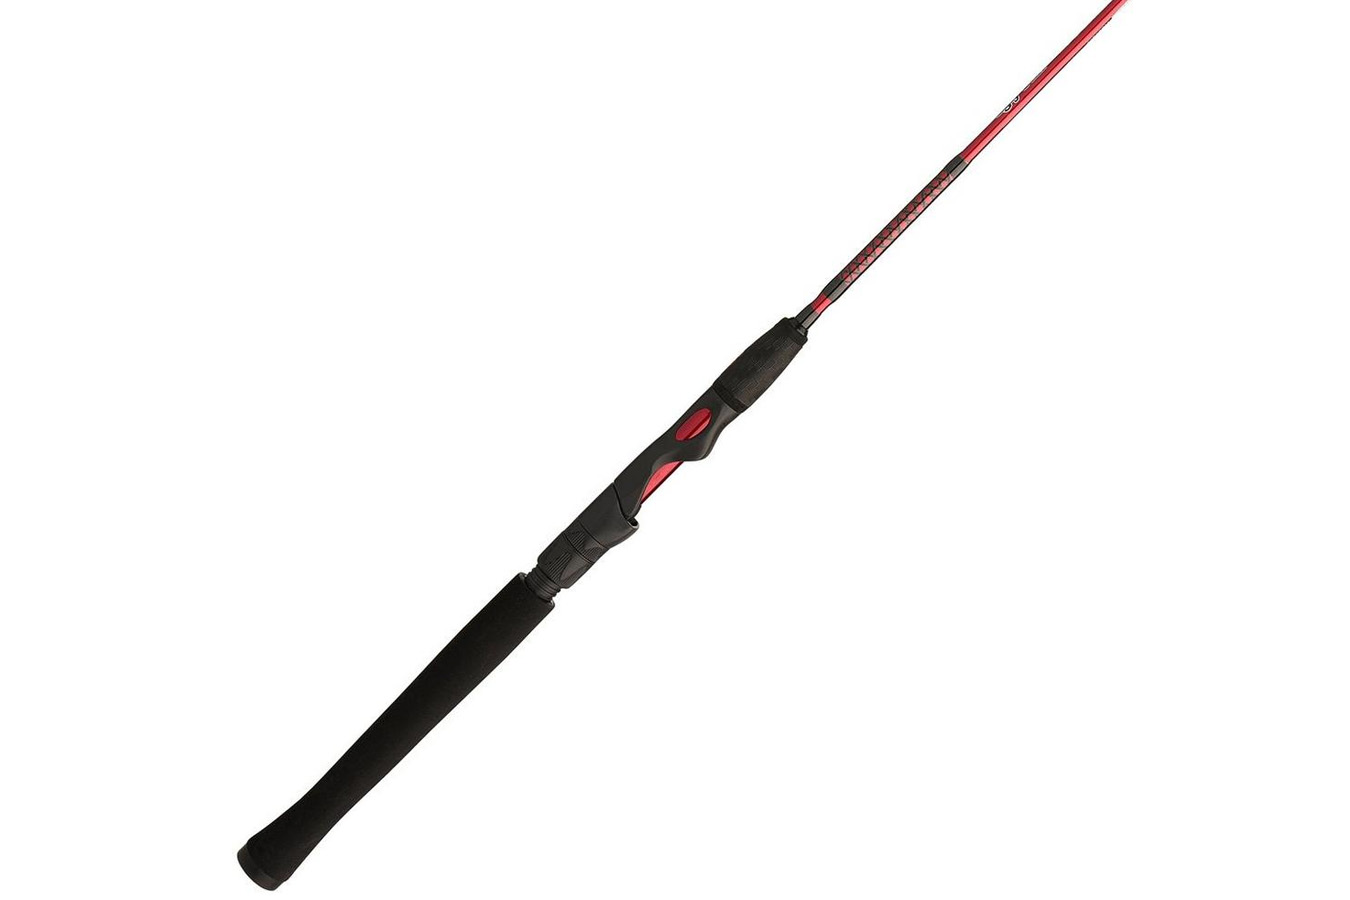 Discount Shakespeare Carbon Crappie 9ft Spinning Rod L for Sale